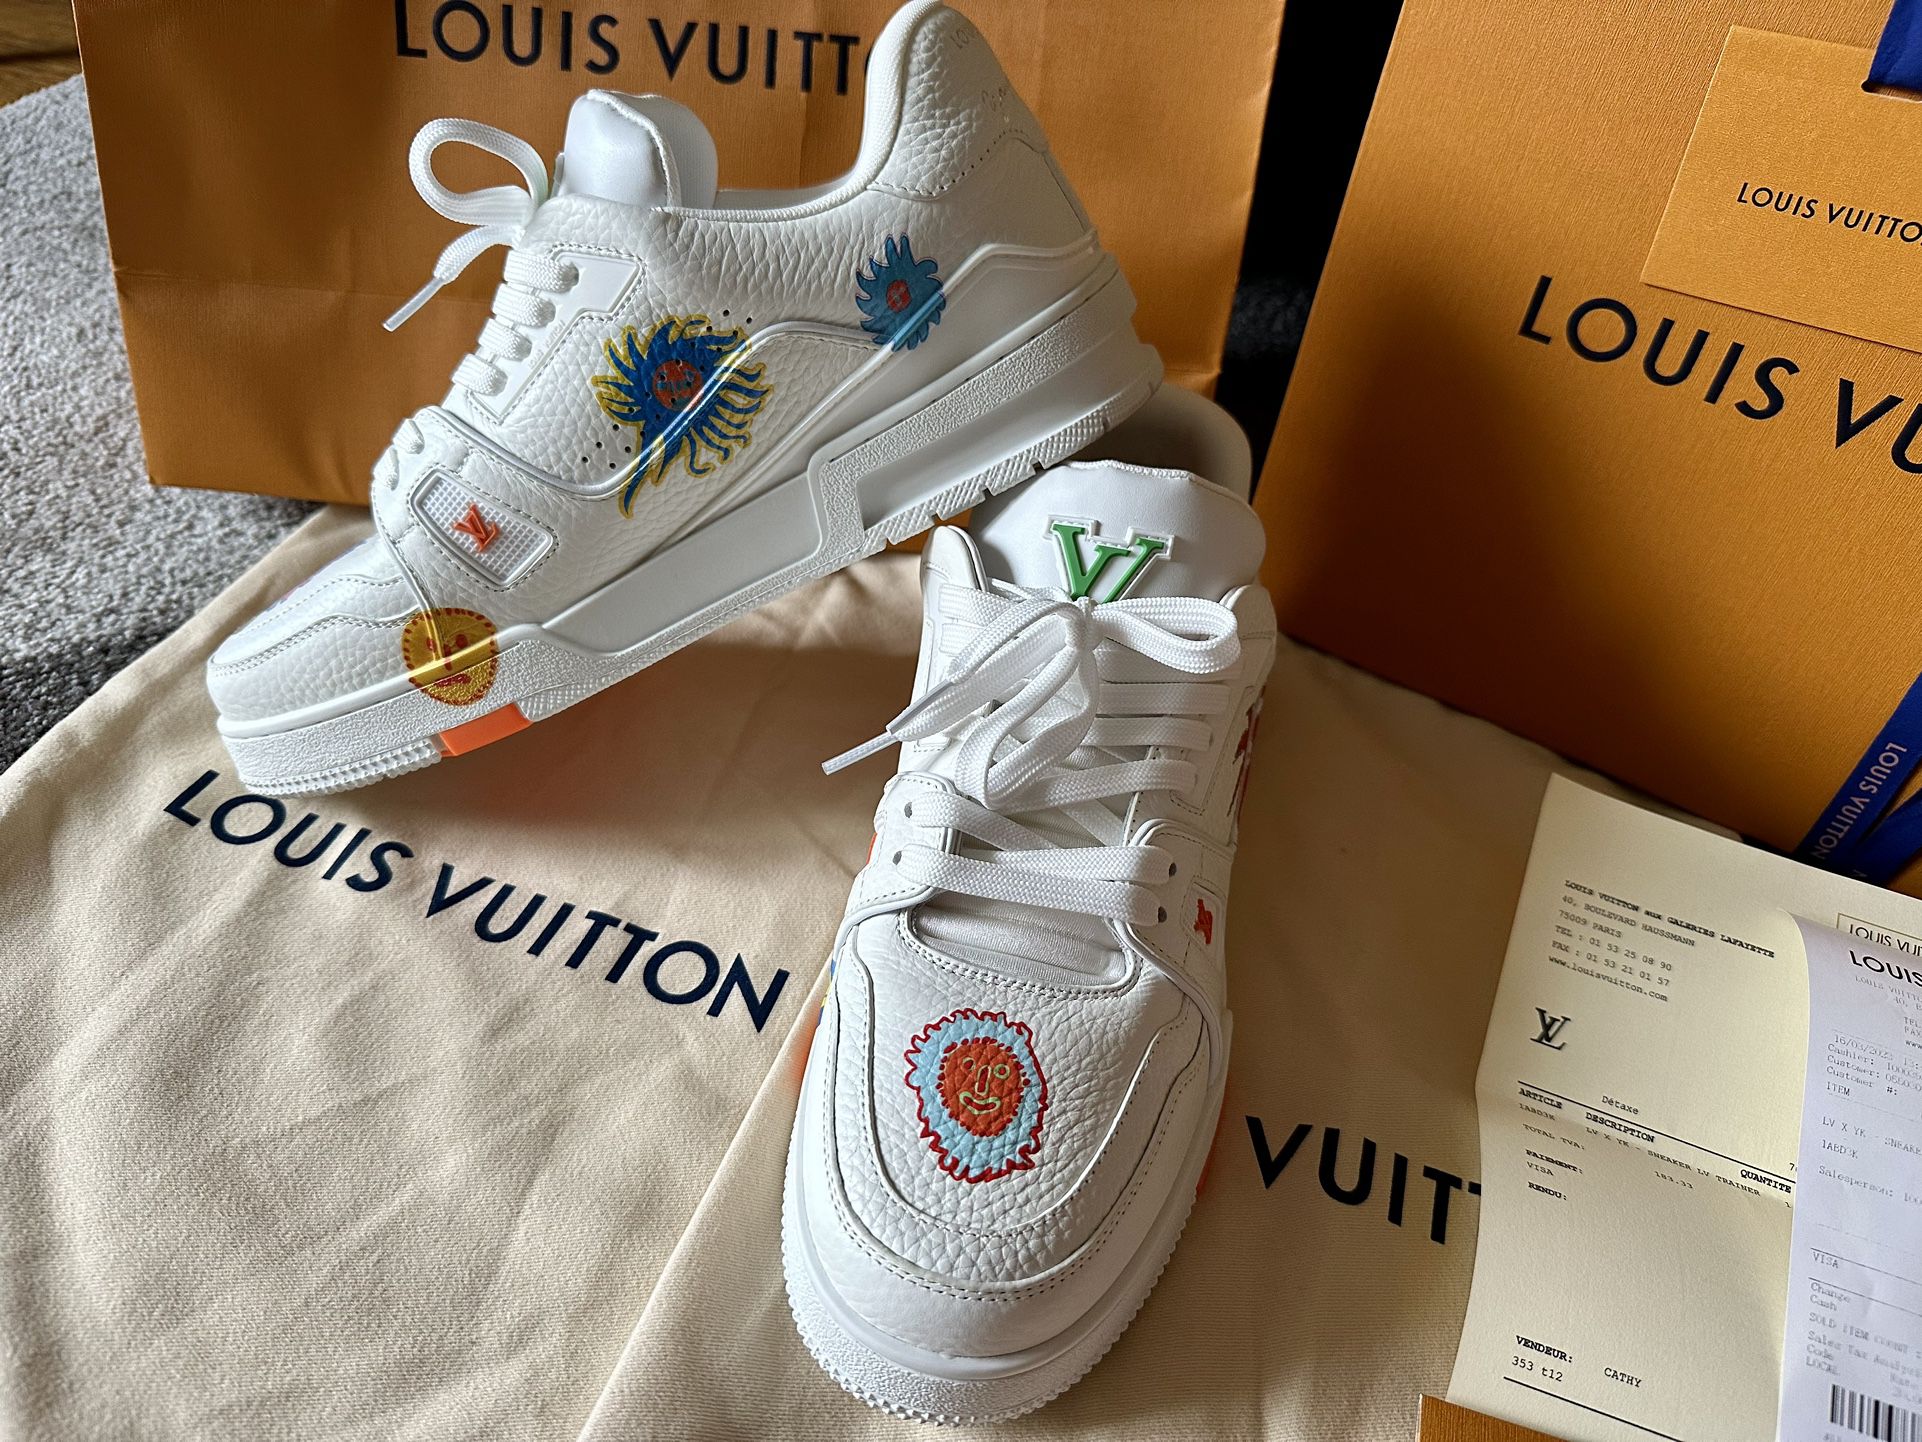 Authentic Louis Vuitton Match-Up Sneaker - Size 8 for Sale in Orange, CA -  OfferUp